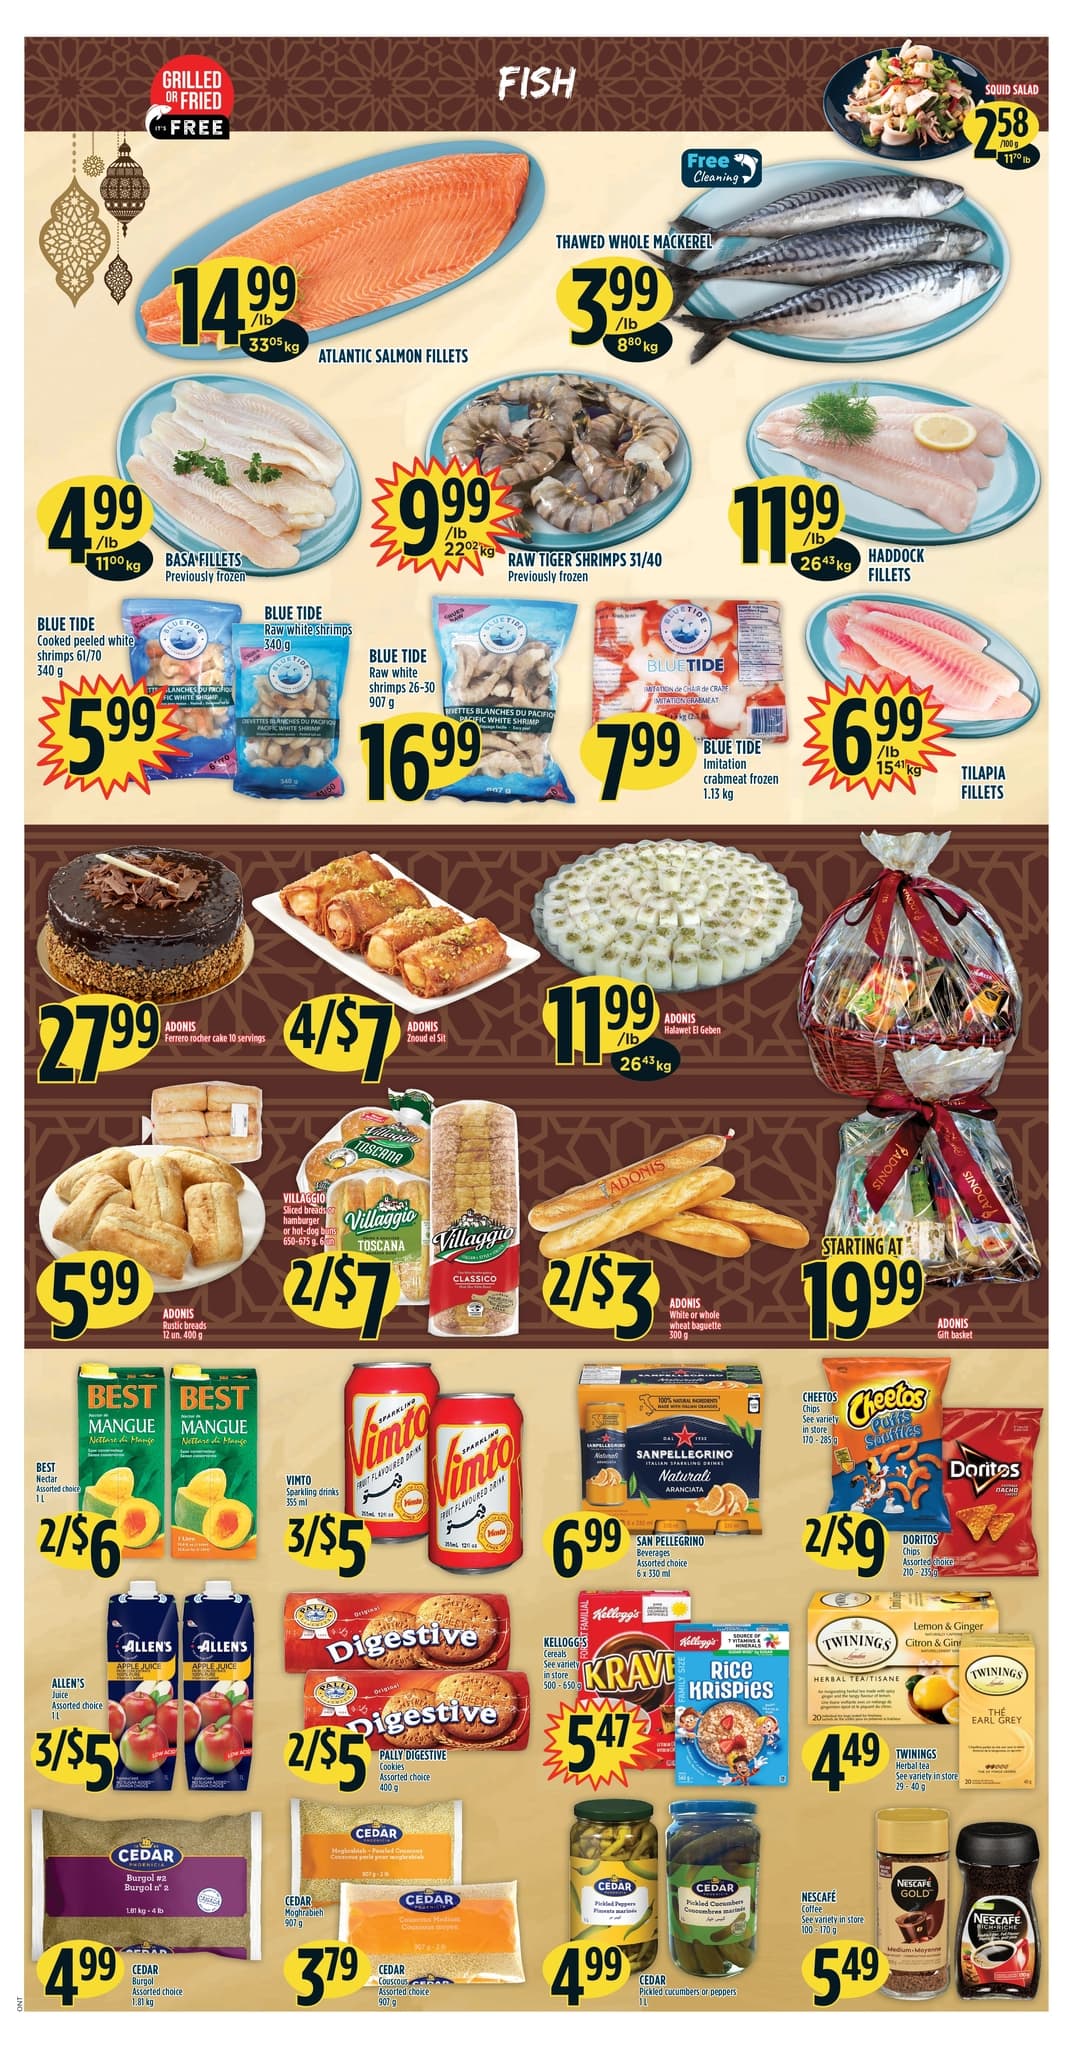 Adonis - Weekly Flyer Specials - Page 3